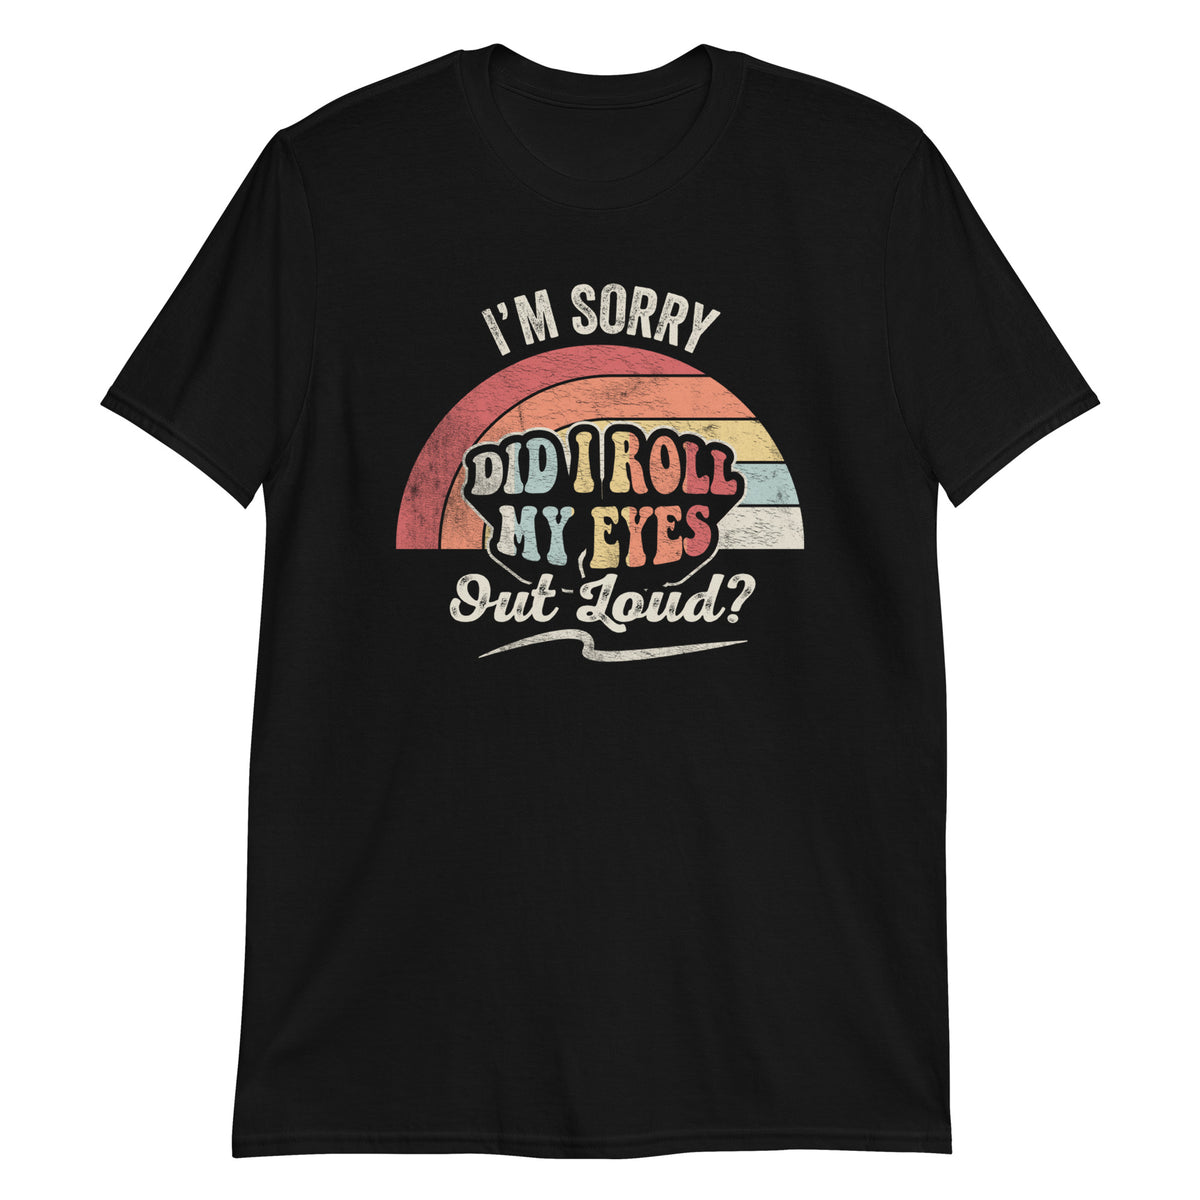 I'm Sorry Did I Roll My Eyes Out Loud? T-Shirt